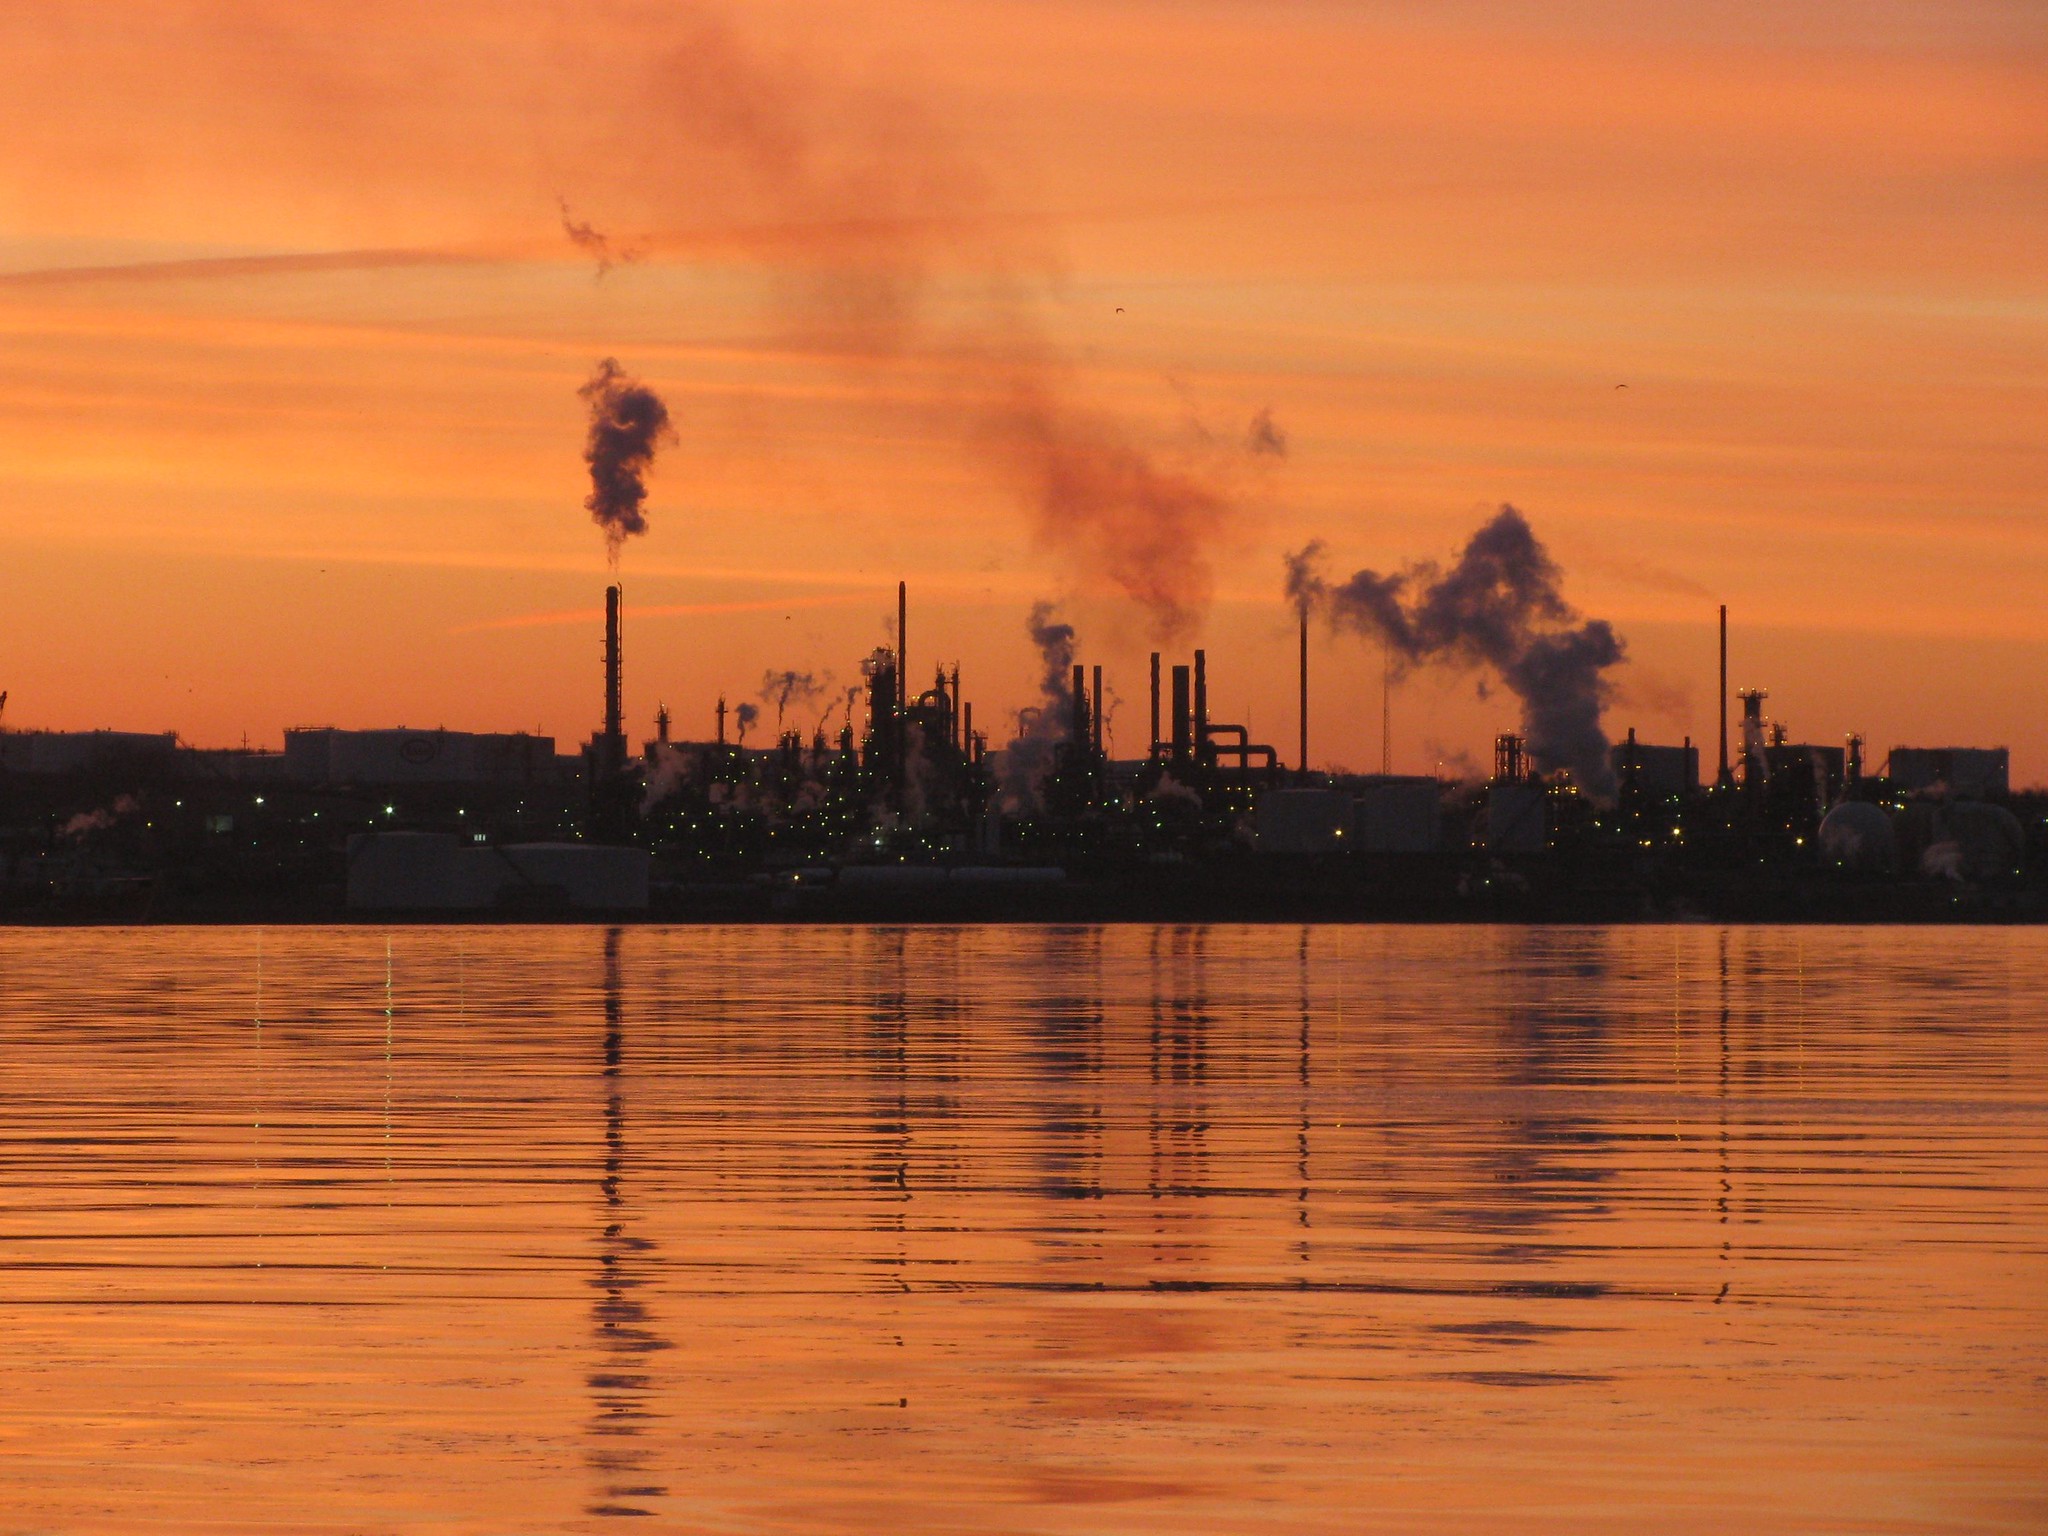 Photo of an oil refinery at dawn, with smoke coming out of the chimneys